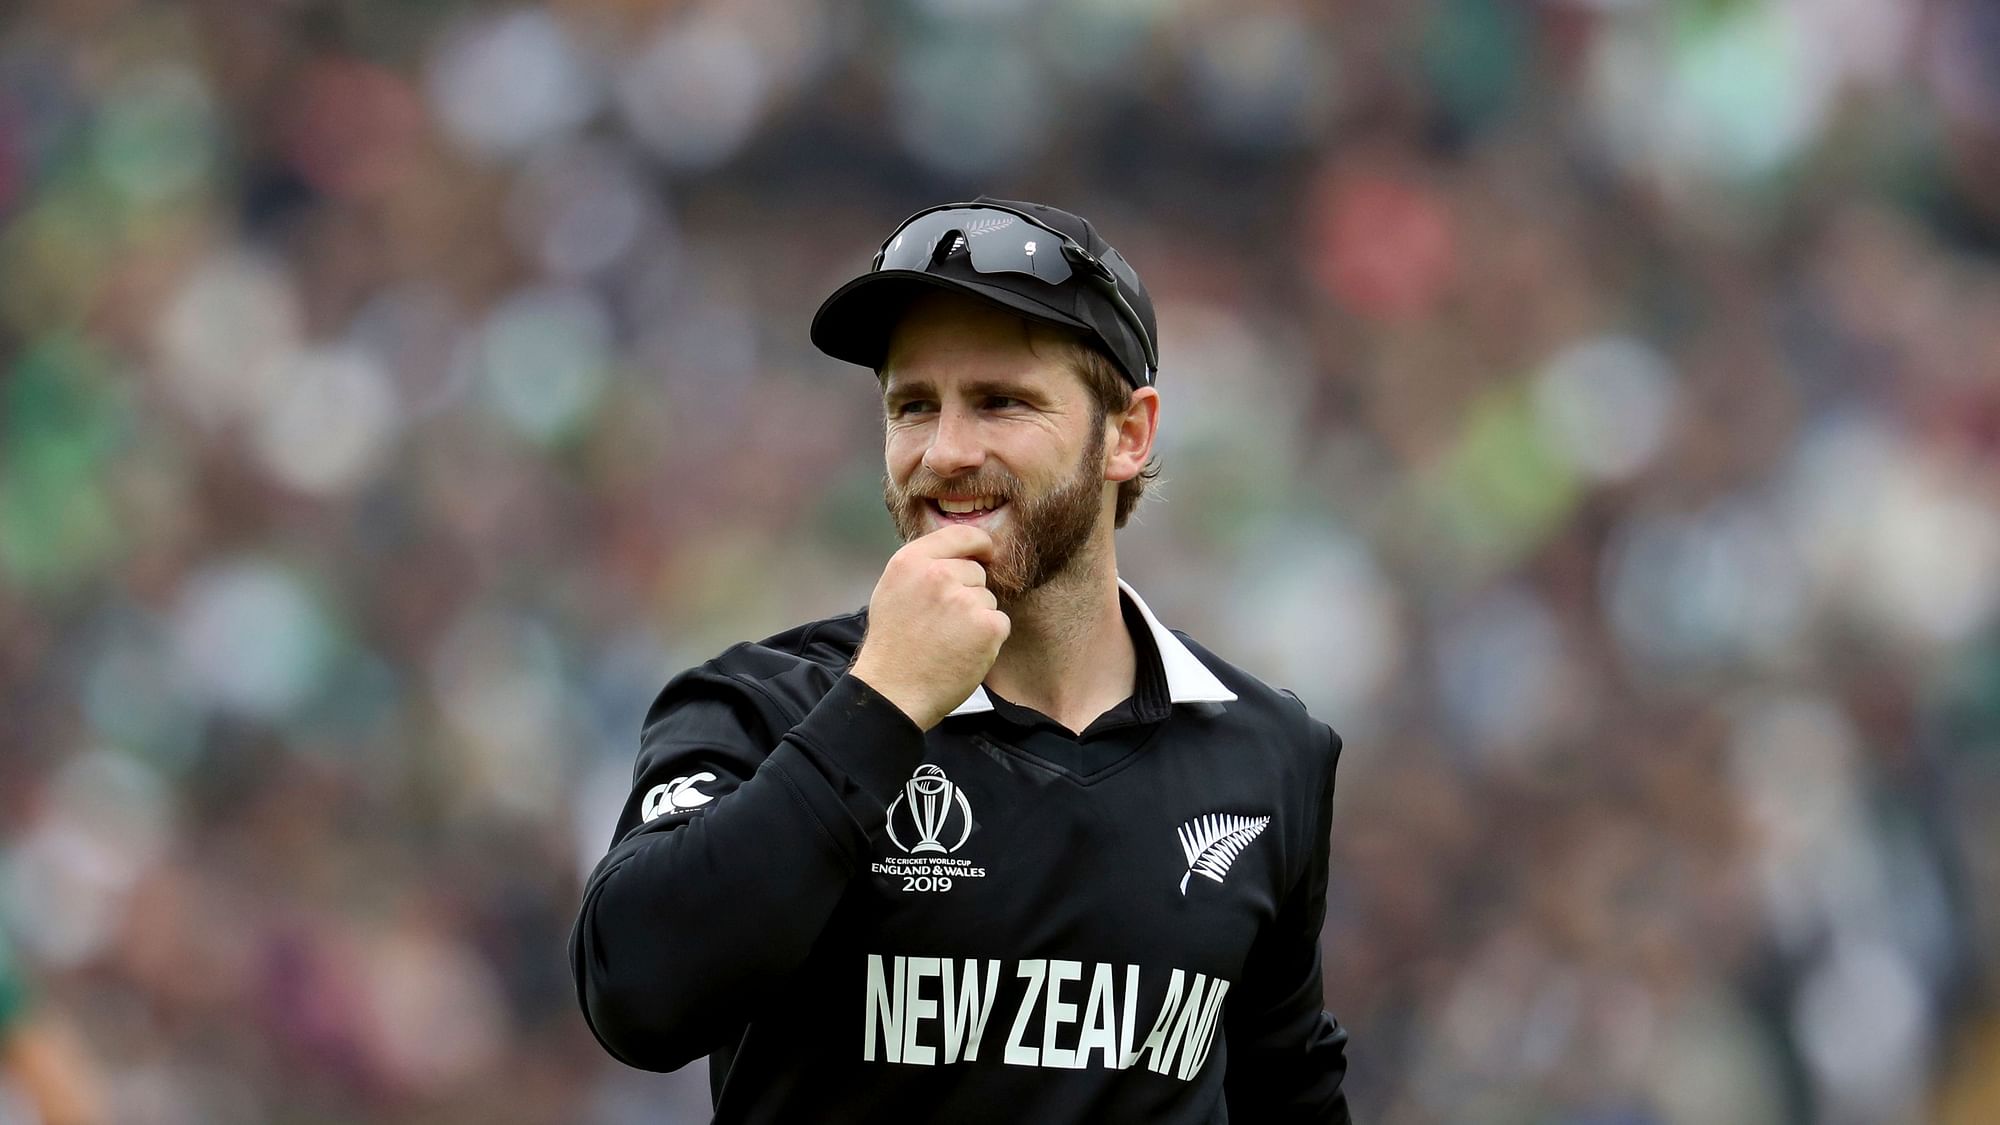 New Zealand’s captain Kane Williamson during the Cricket World Cup match between New Zealand and Pakistan at the Edgbaston Stadium in Birmingham, England, Wednesday, 26 June, 2019.